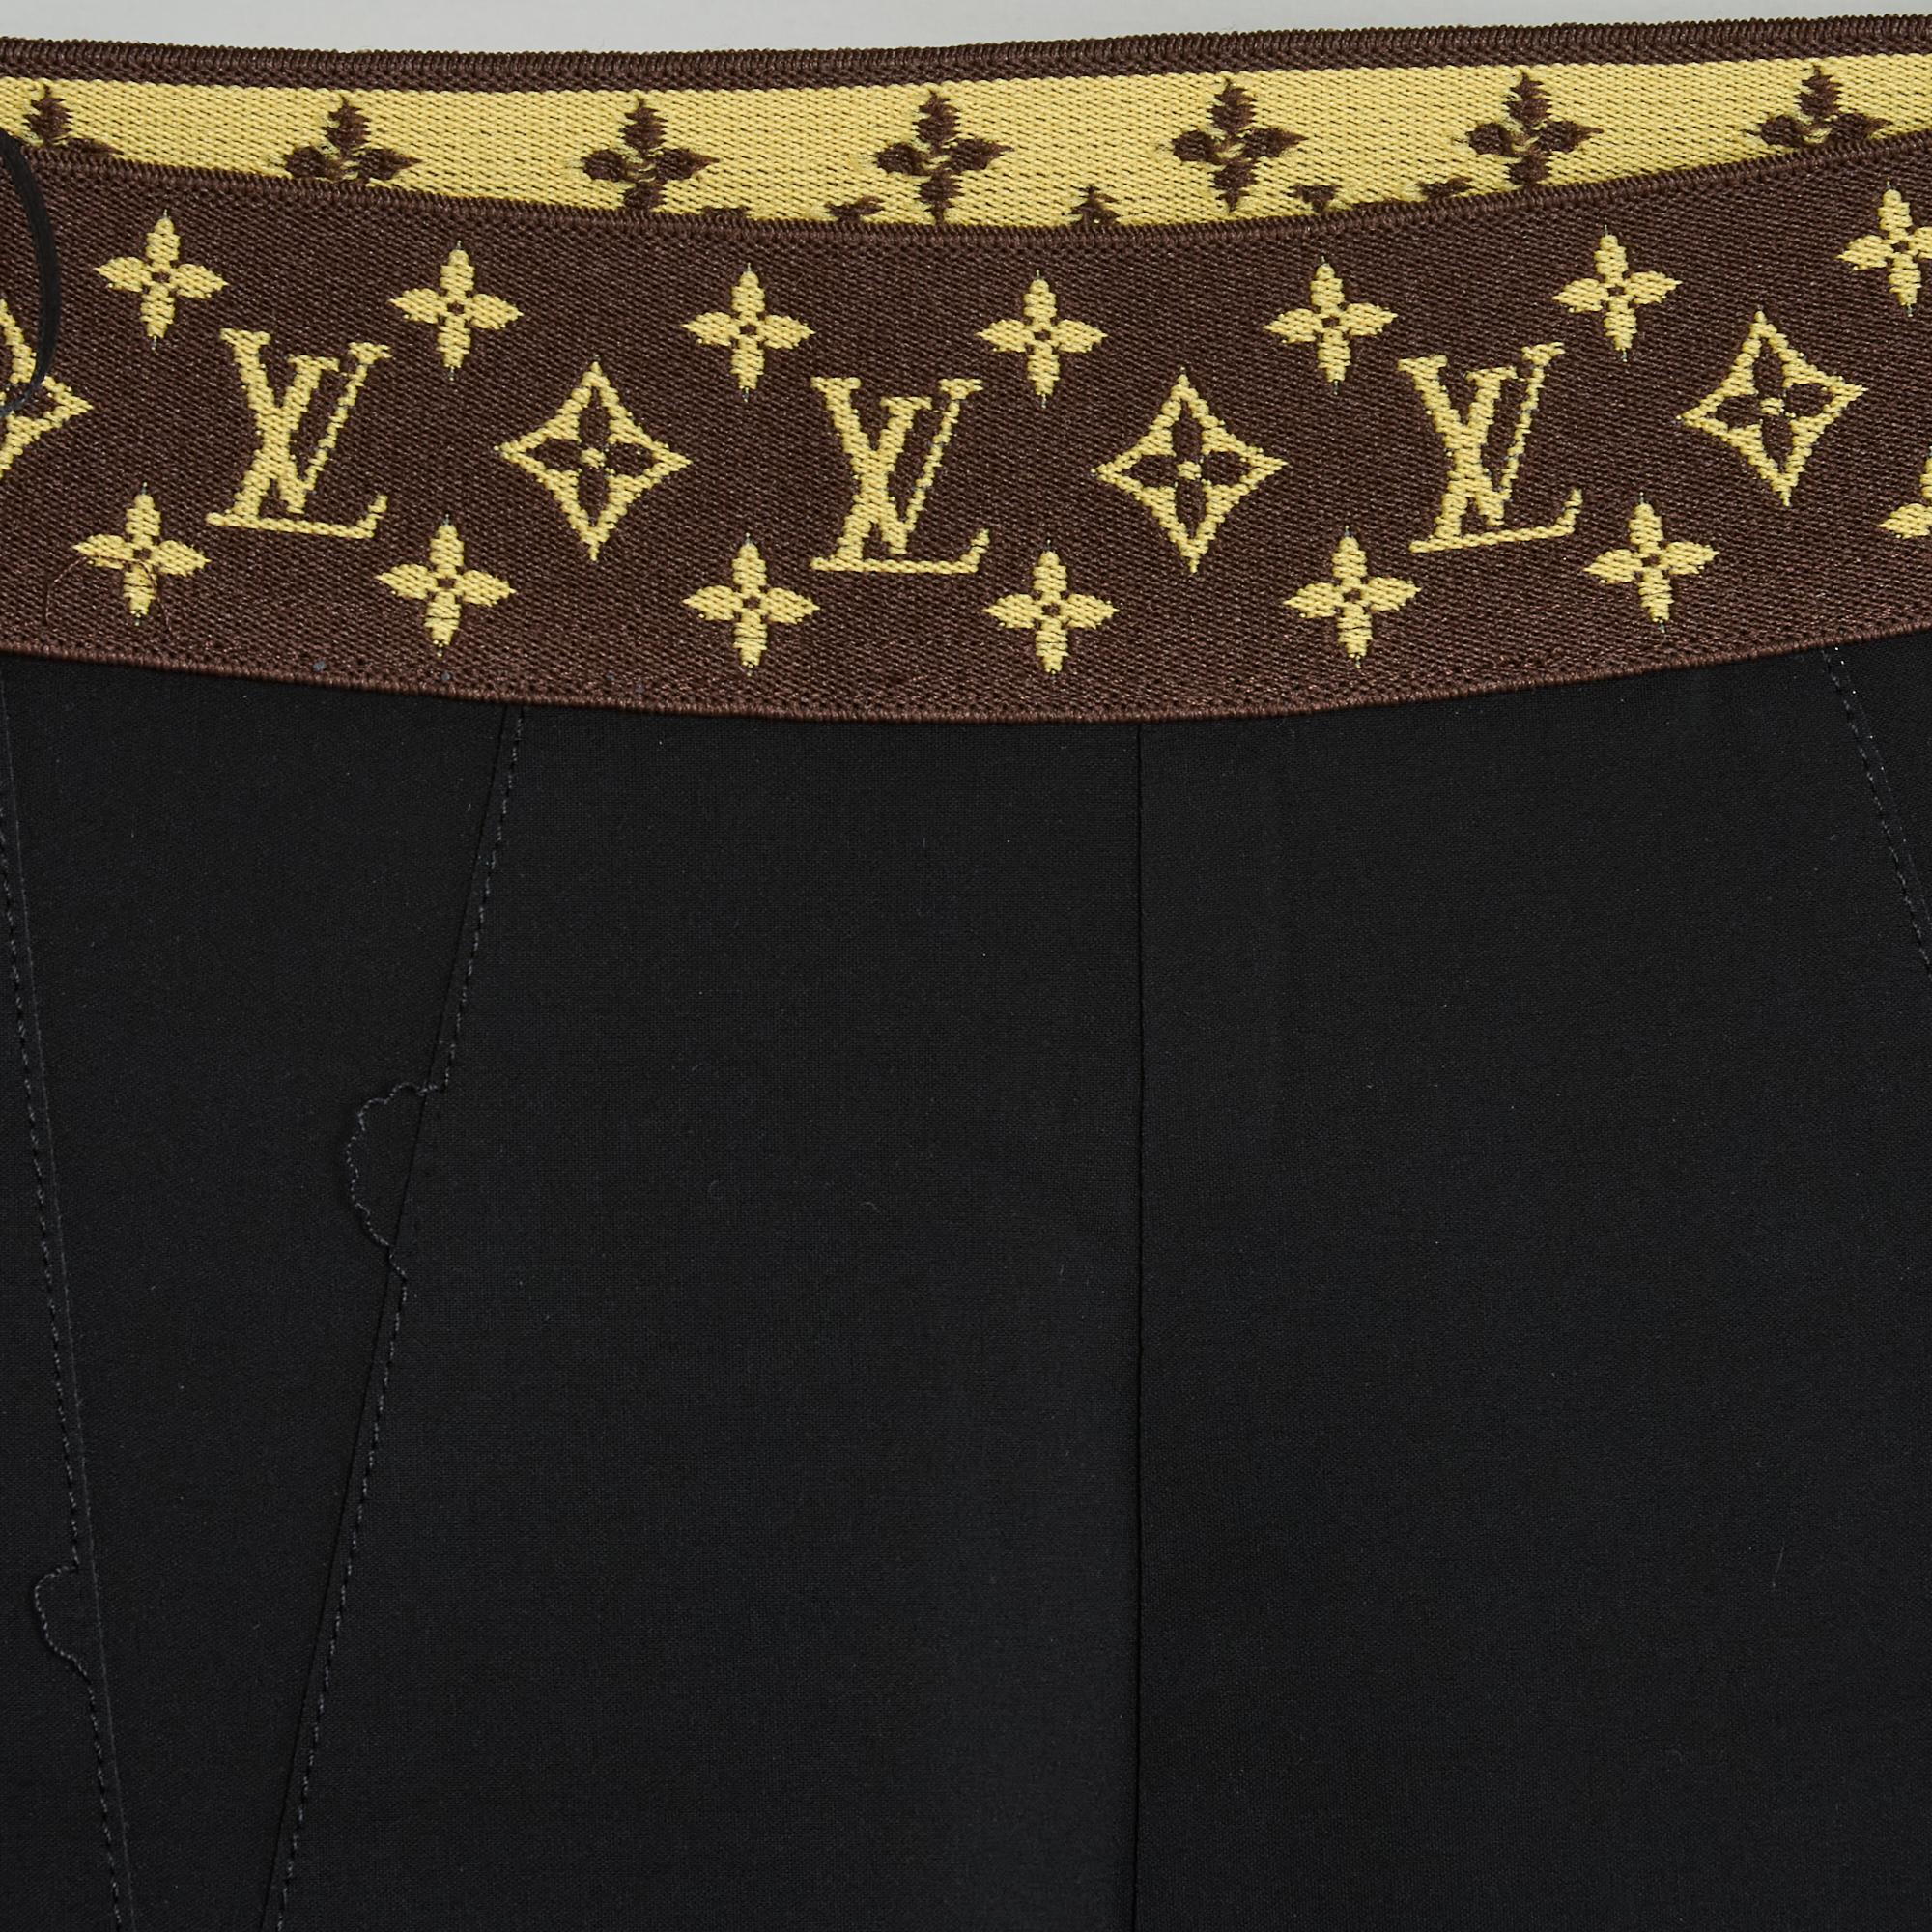 Louis Vuitton legging pants by Nicolas Ghesquière in black polyamide, mid-high waist elastic monogram-shaped belt, dark blue polyamide strip running the entire height of the crotch, side closure with a monogram-printed zip with blackened metal